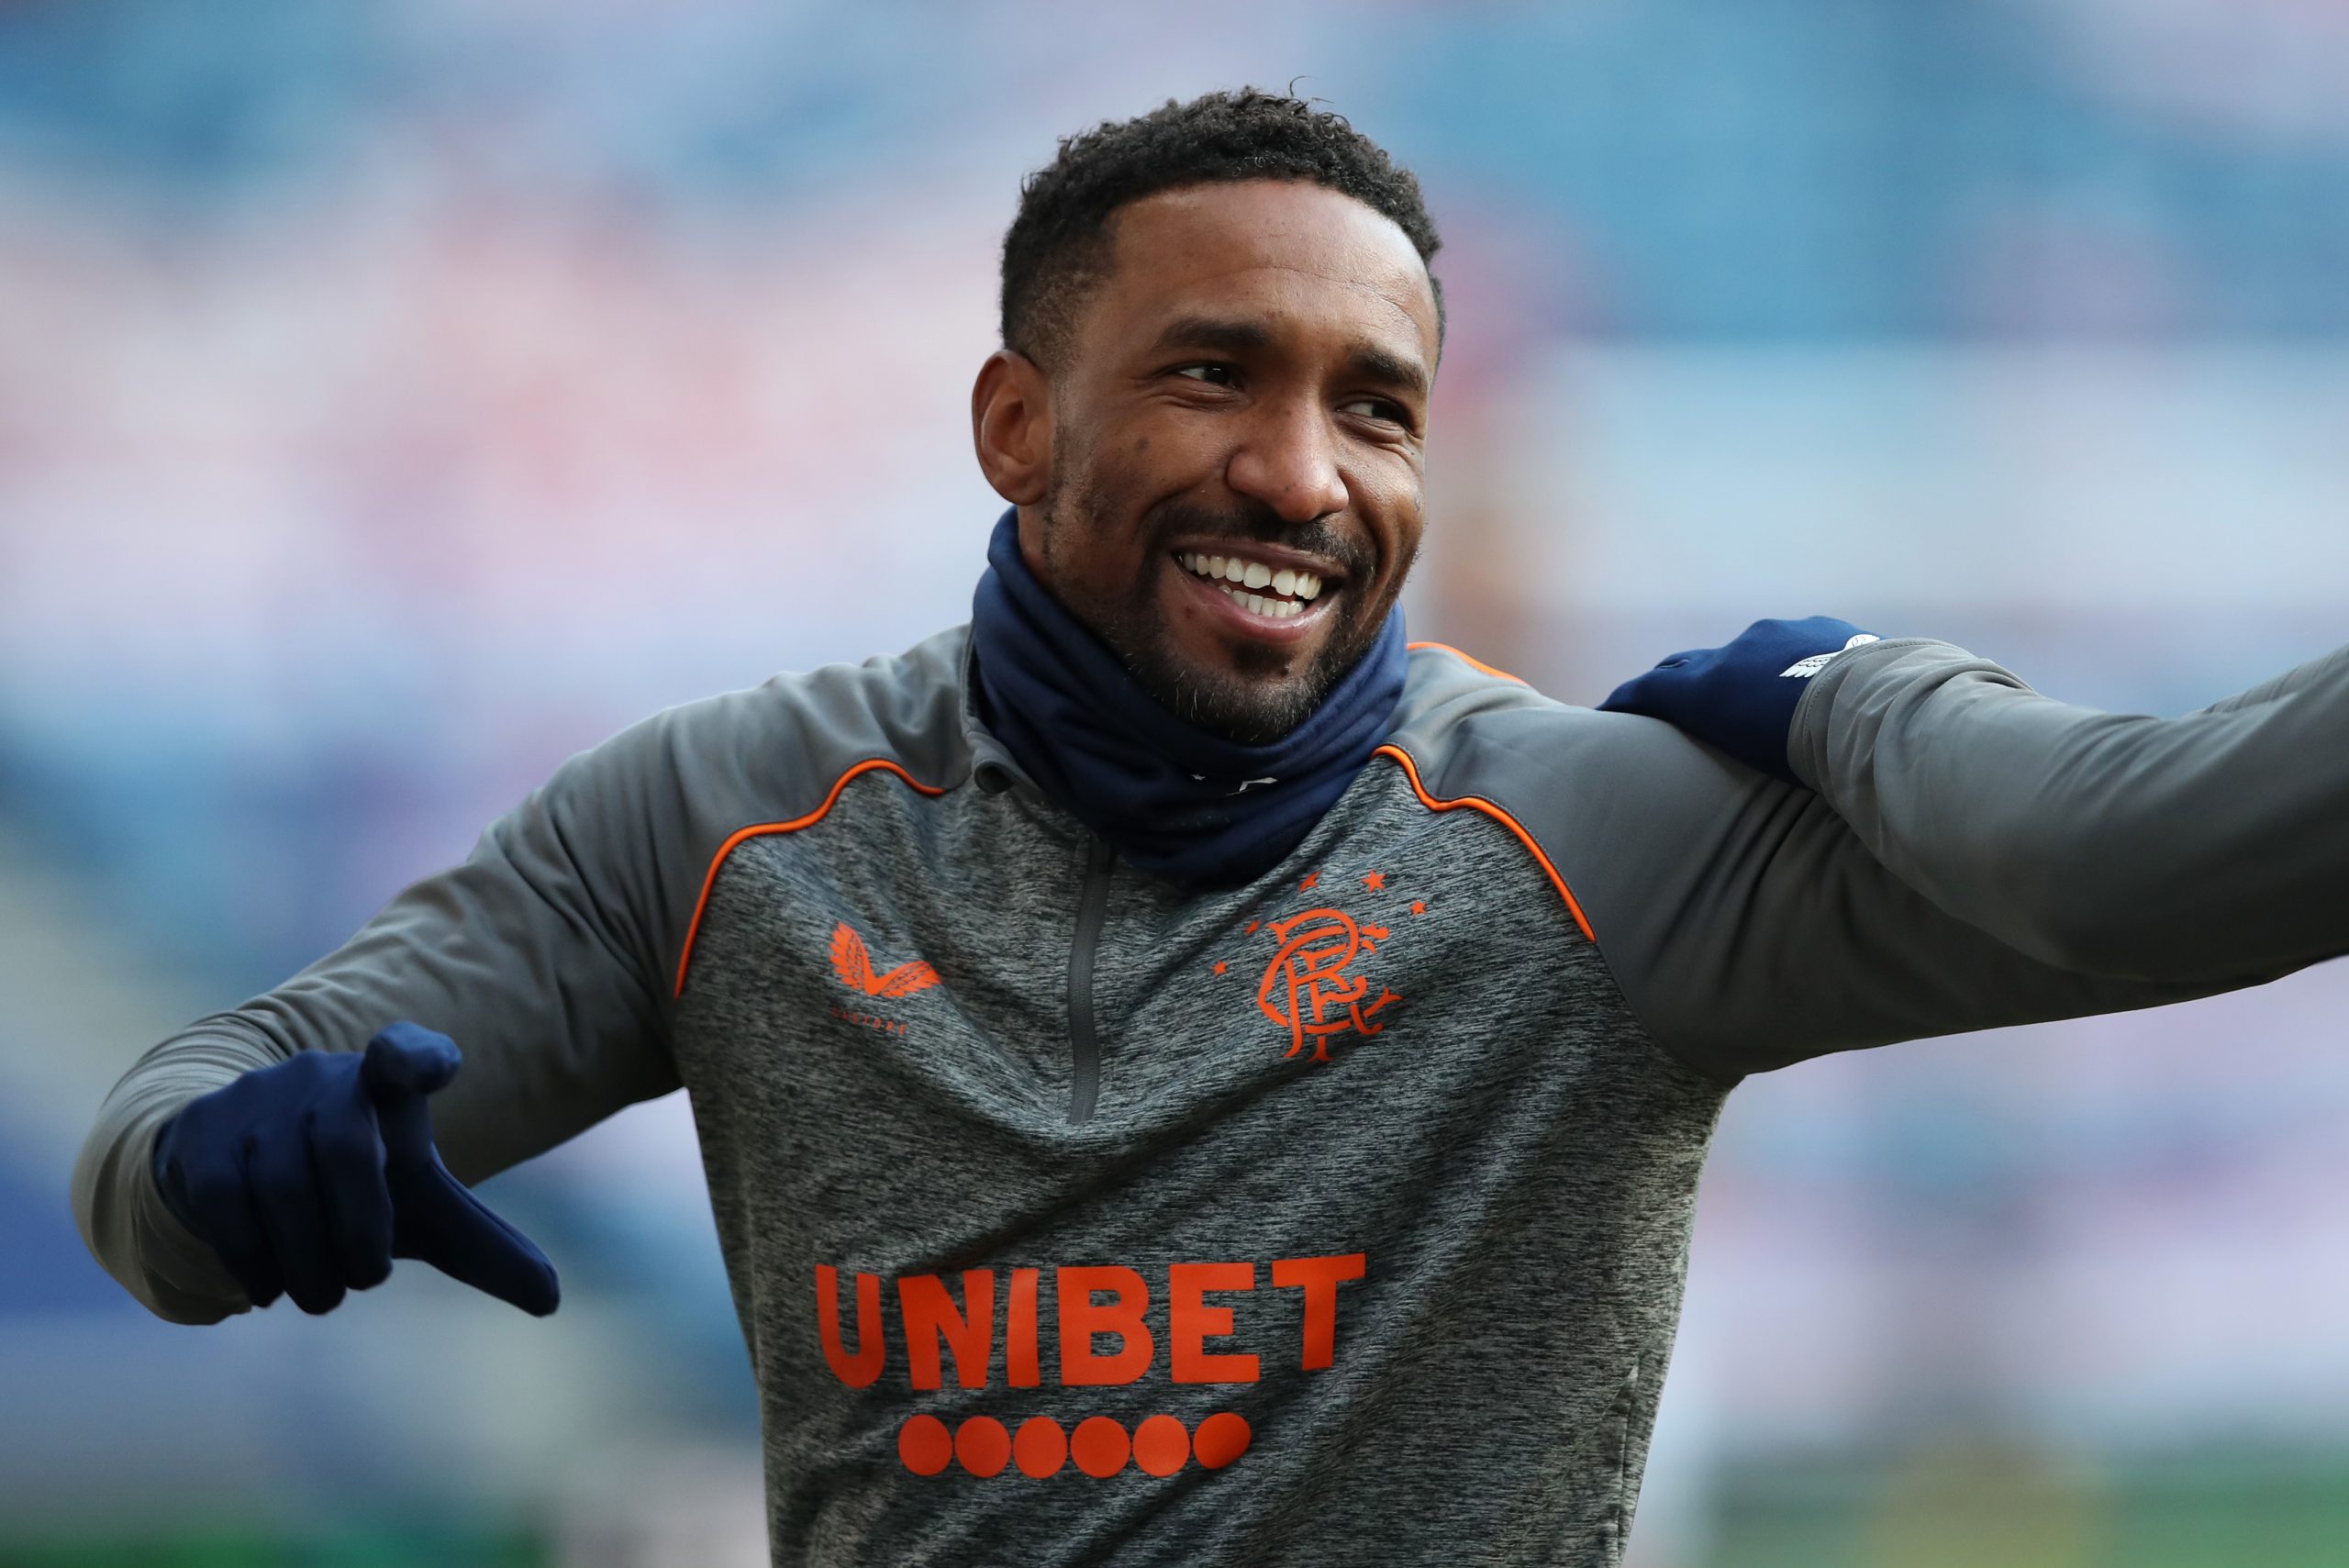 Tottenham legend Jermaine Defoe names which current footballer he would want to play with